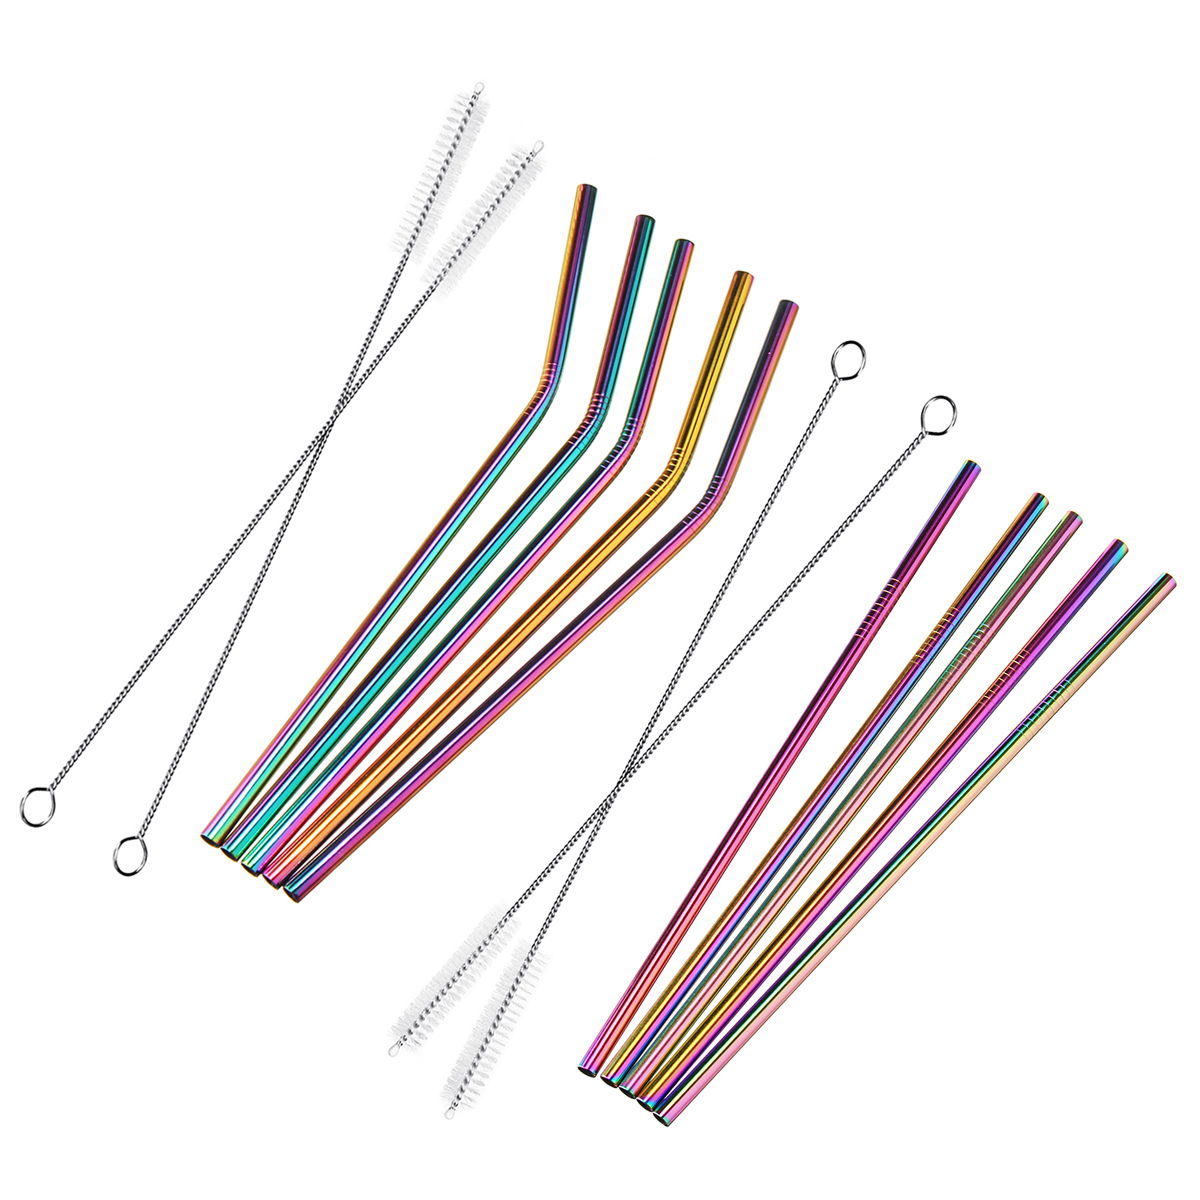 7PCS-Premium-Stainless-Steel-Metal-Drinking-Straw-Reusable-Straws-Set-With-Cleaner-Brushes-1347731-4